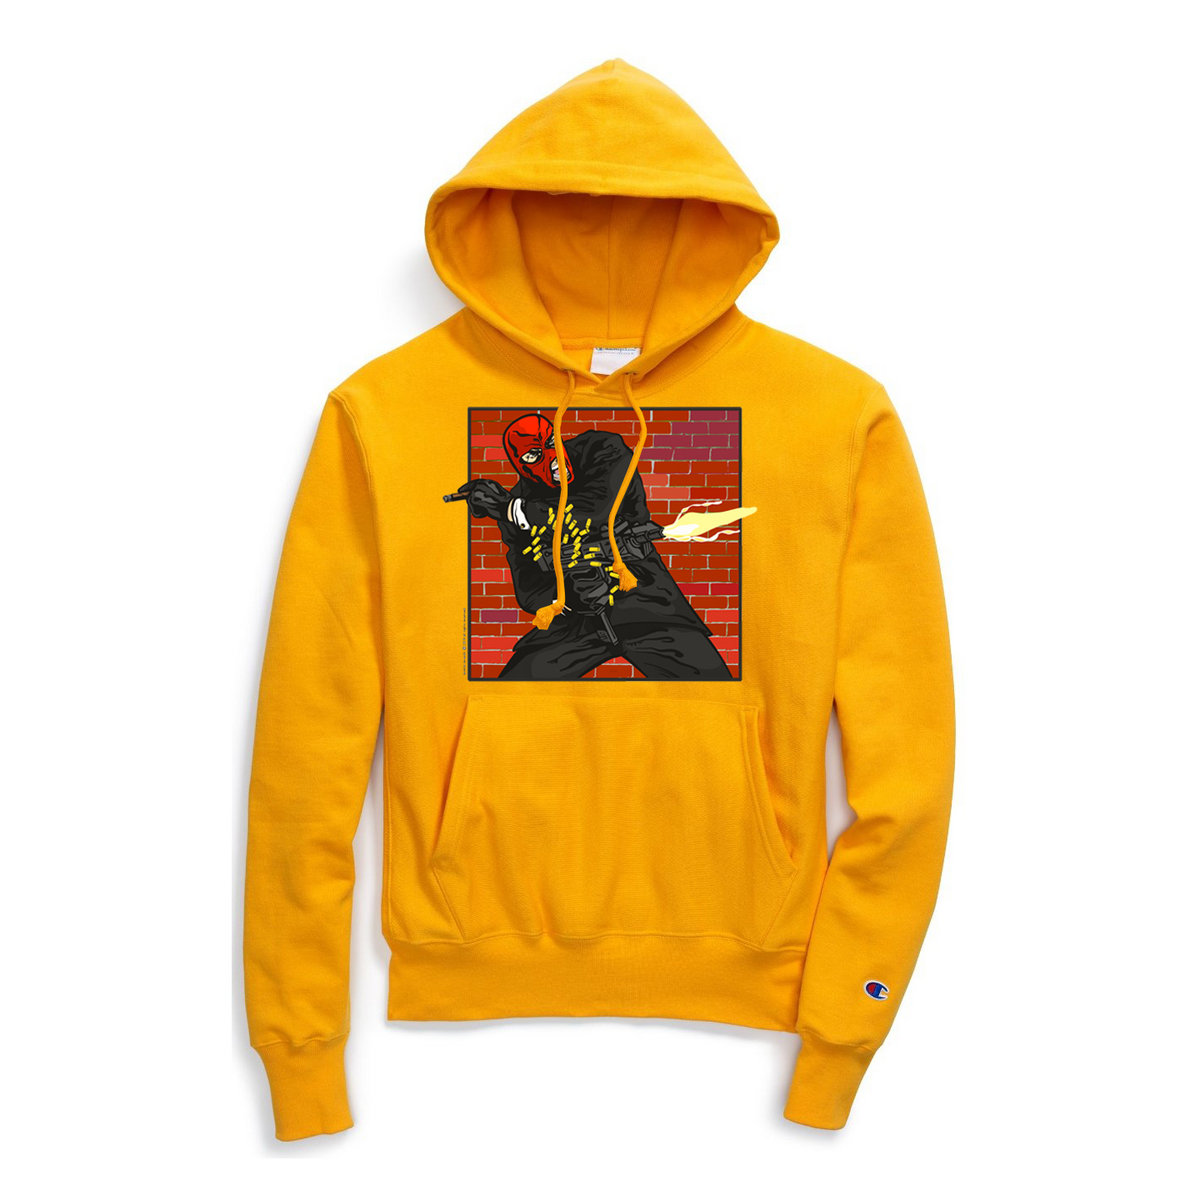 limited edition champion hoodie